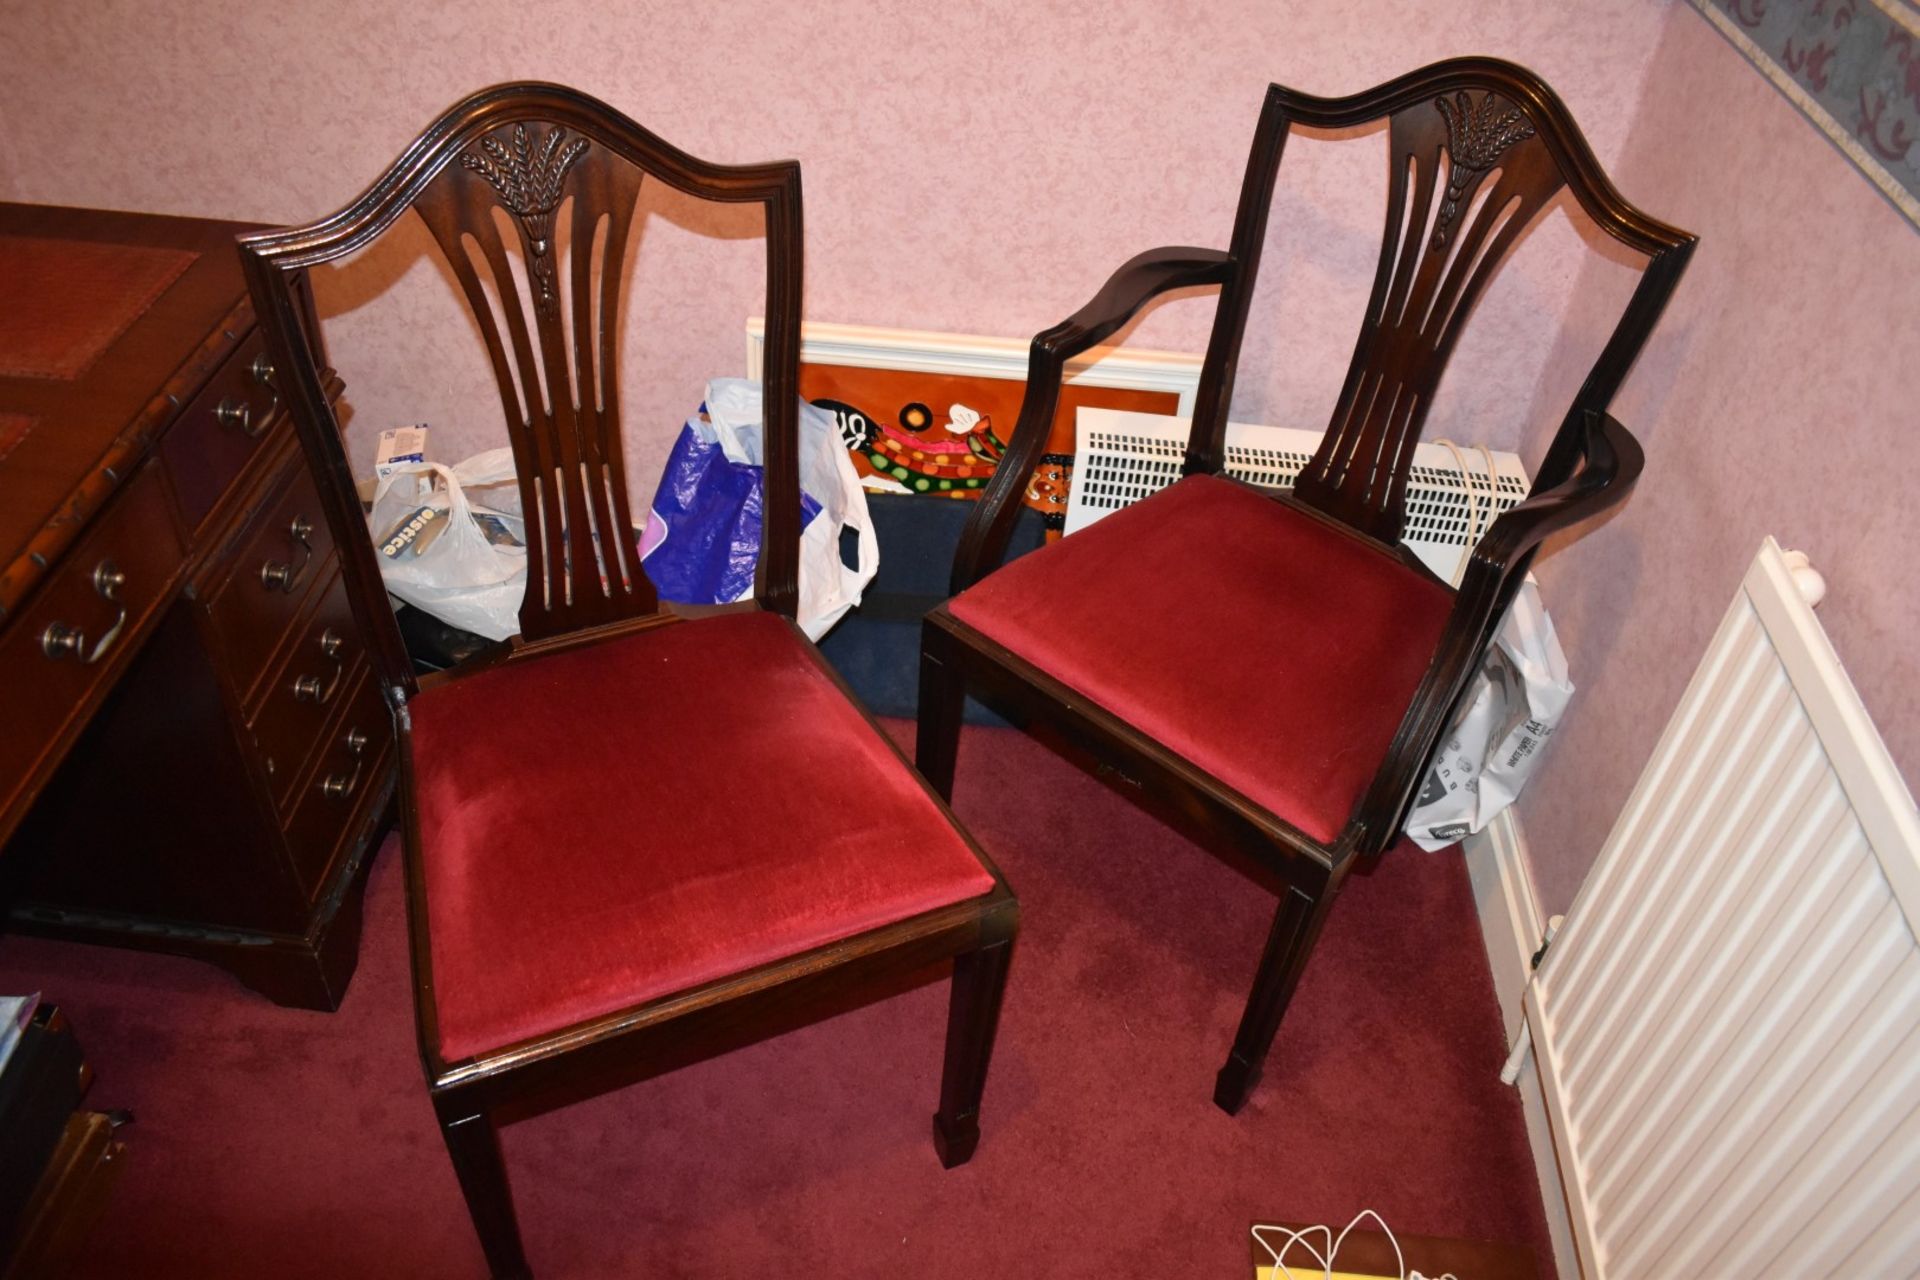 2 x Mahogany Shieldback Dining Chairs With Cushioned Seats Upholstered in Red Fabric - CL579 - No - Image 4 of 4